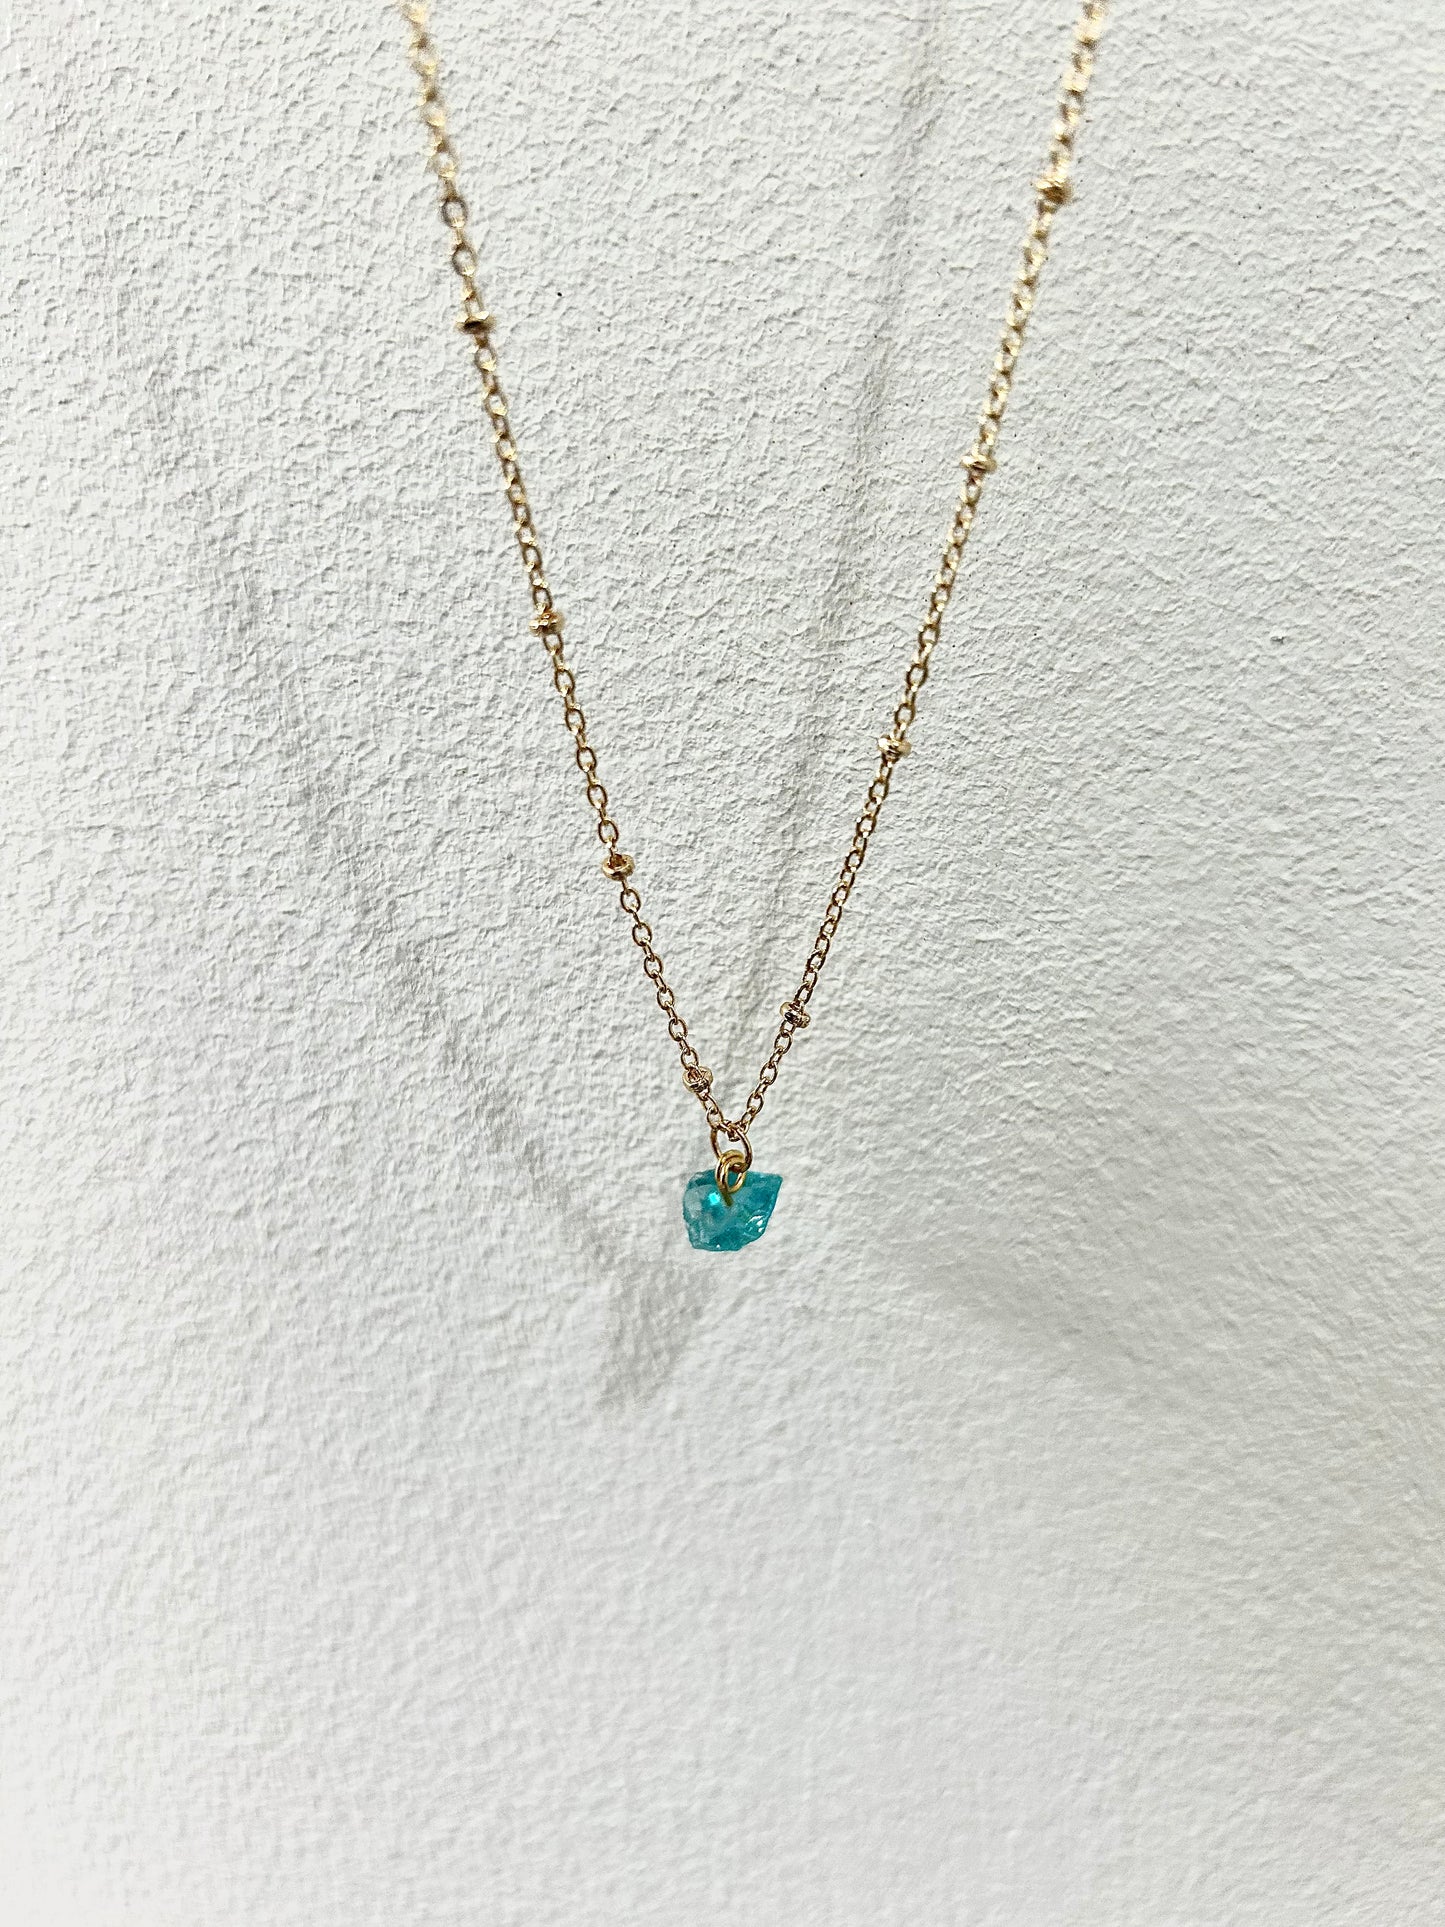 Apatite raw crystal necklace